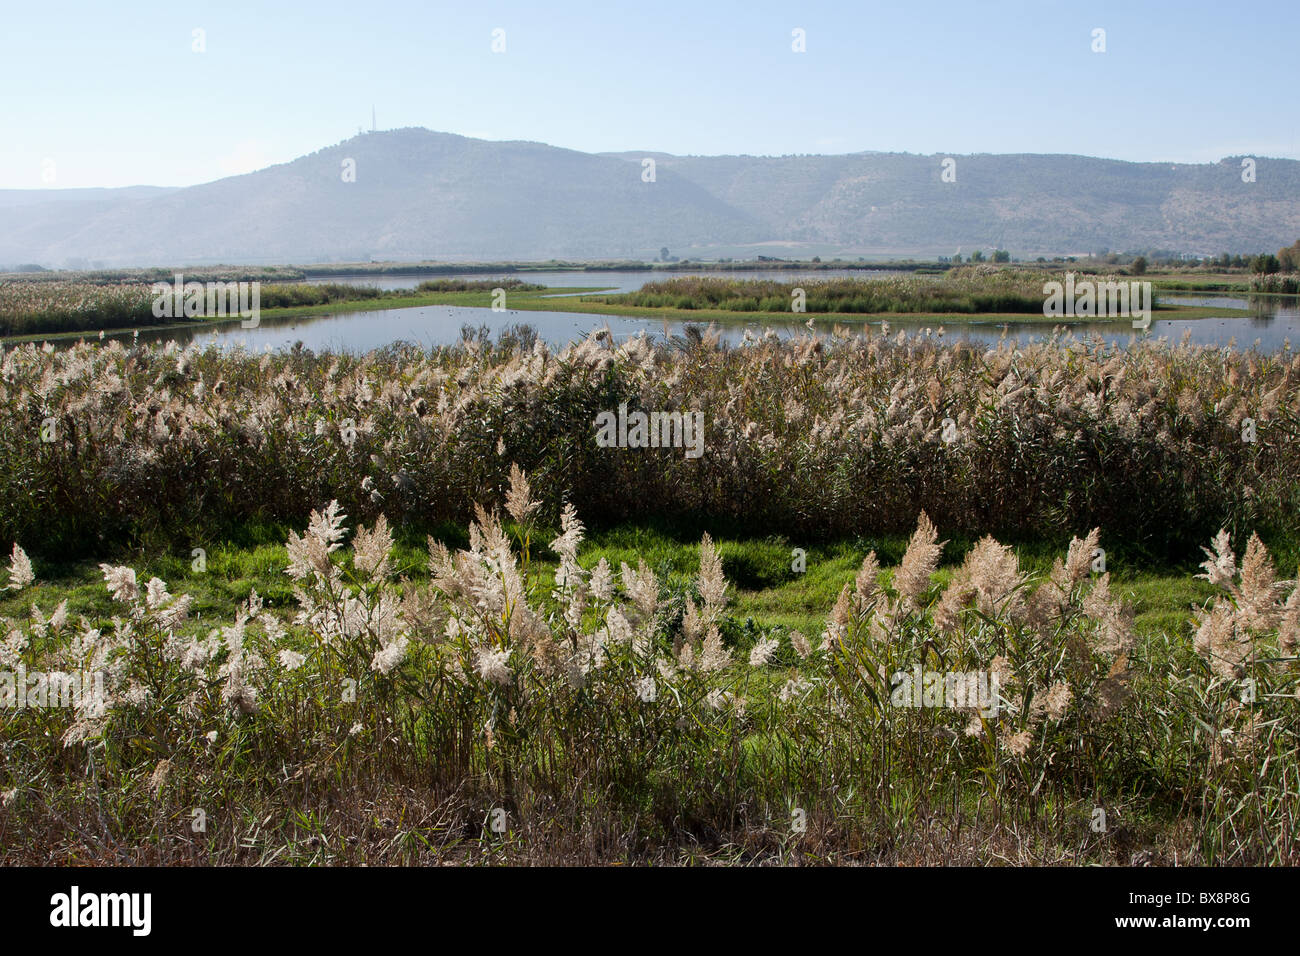 Agamon Hula is an artificial lake created by flooding of the area in the Hula Valley in the Northern Galilee, Israel. Stock Photo